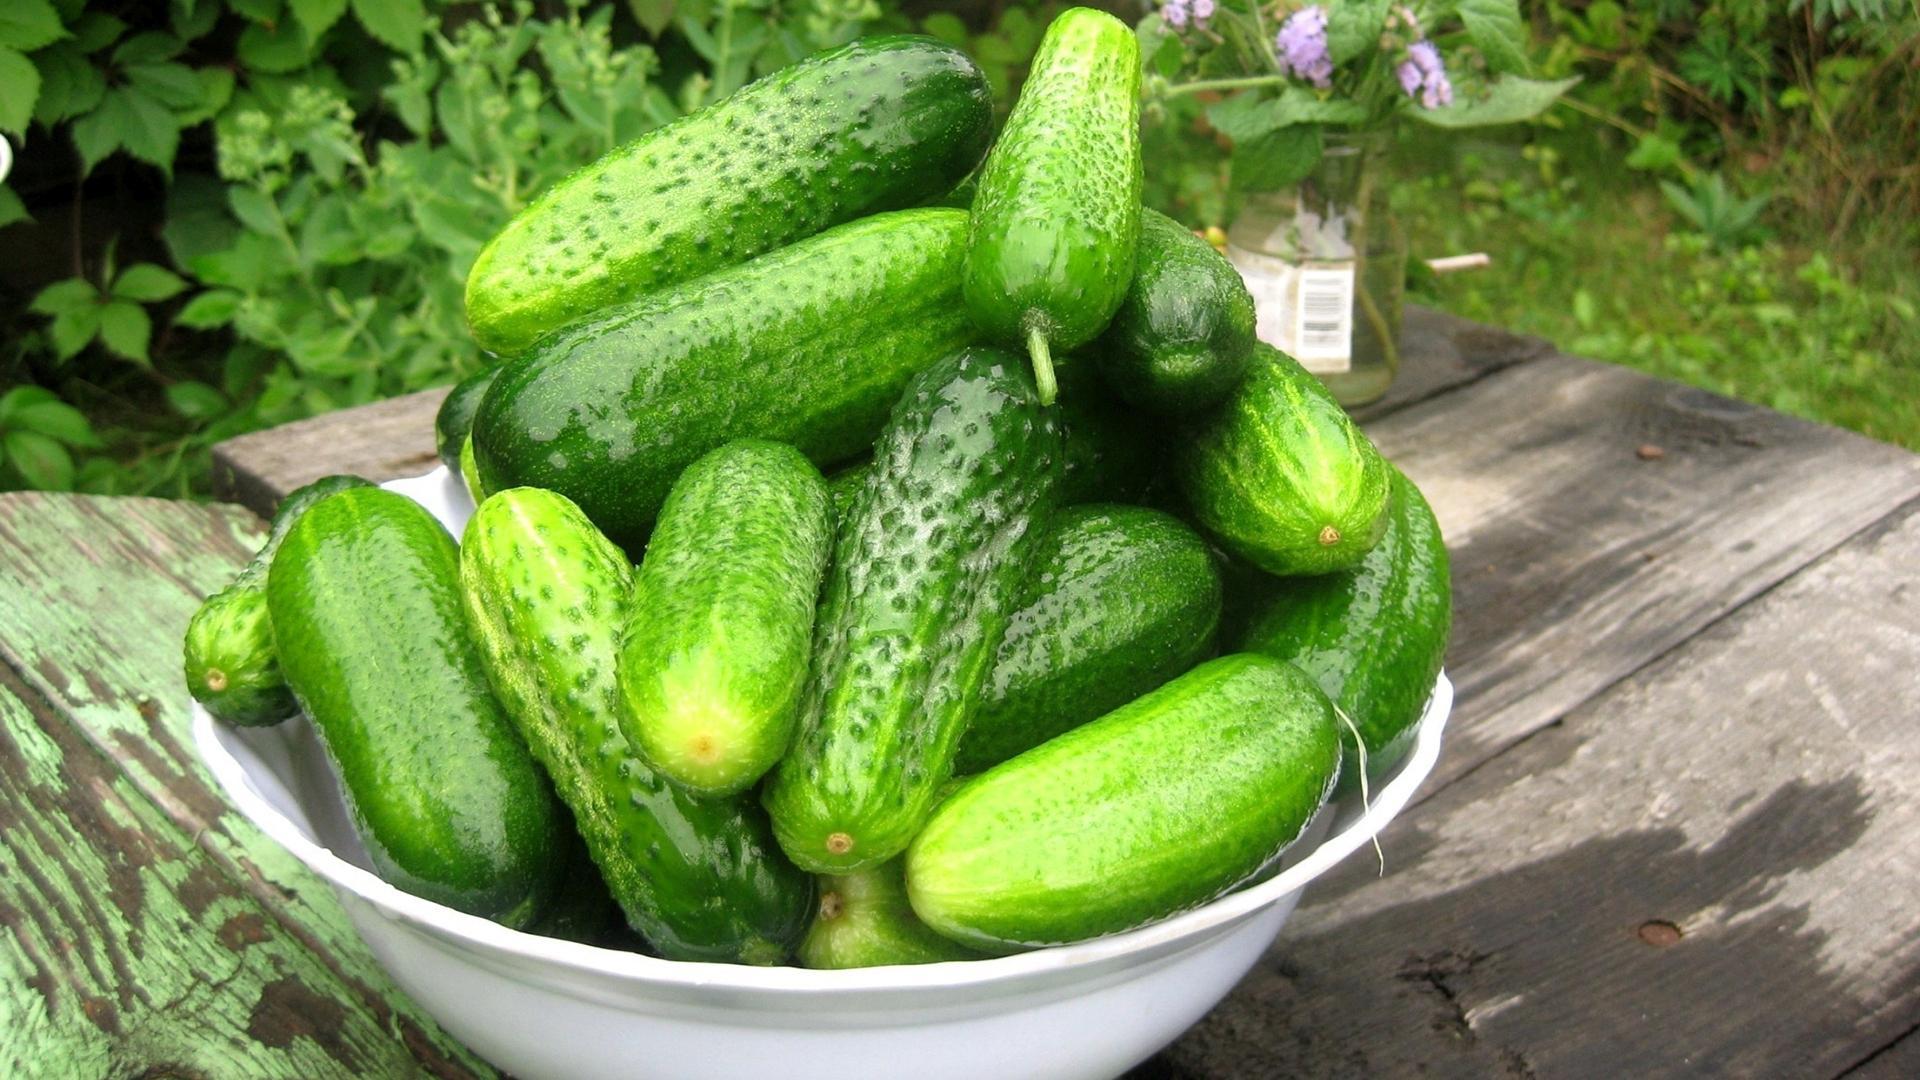 Cucumbers wallpaper. nature and landscape